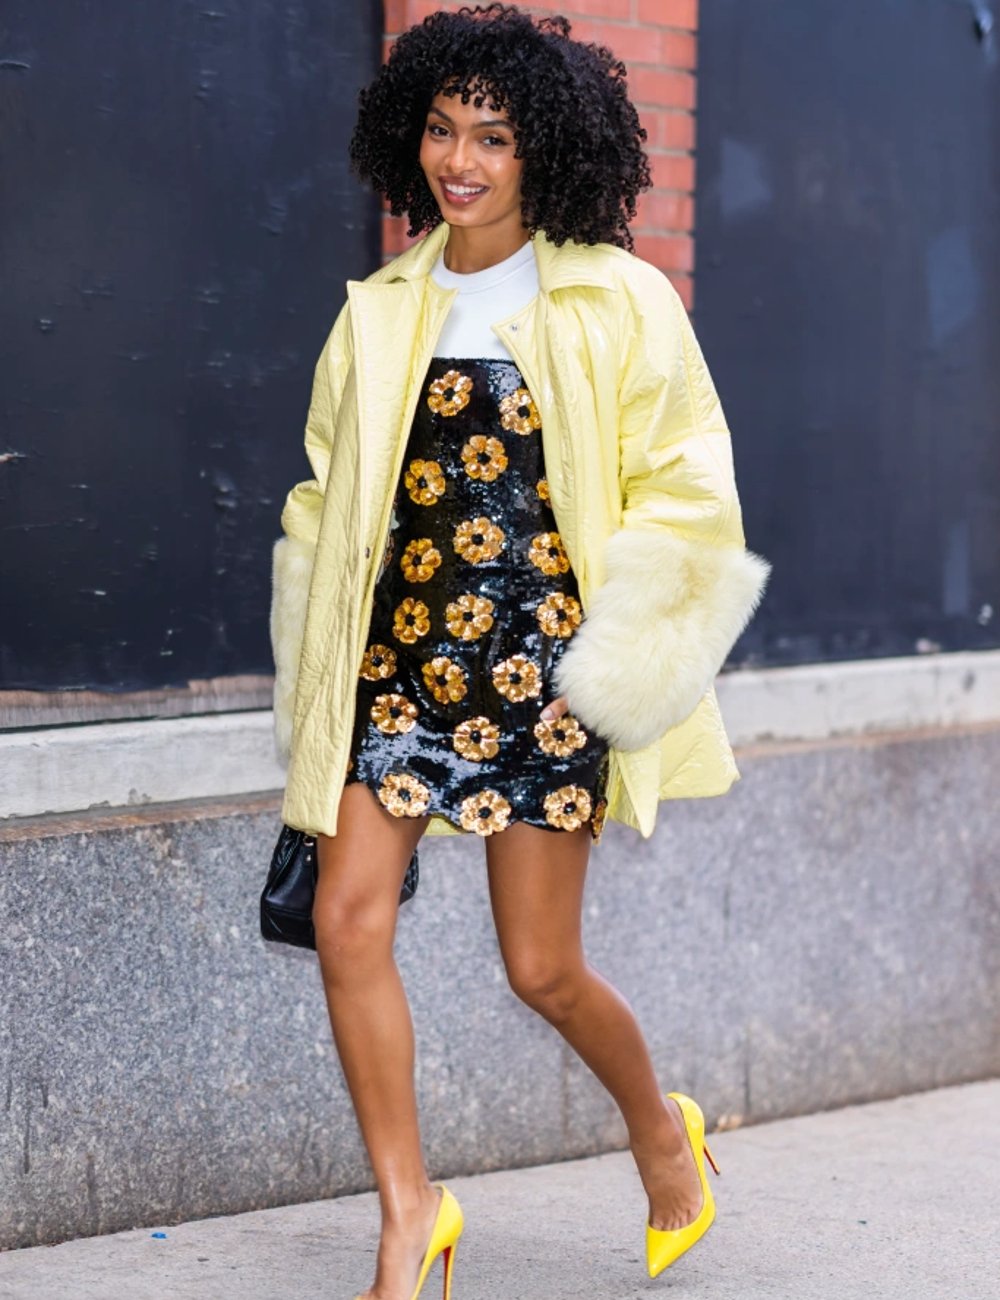 Yara Shahidi - Yara Shahidi - Yara Shahidi - inverno - street style - https://stealthelook.com.br